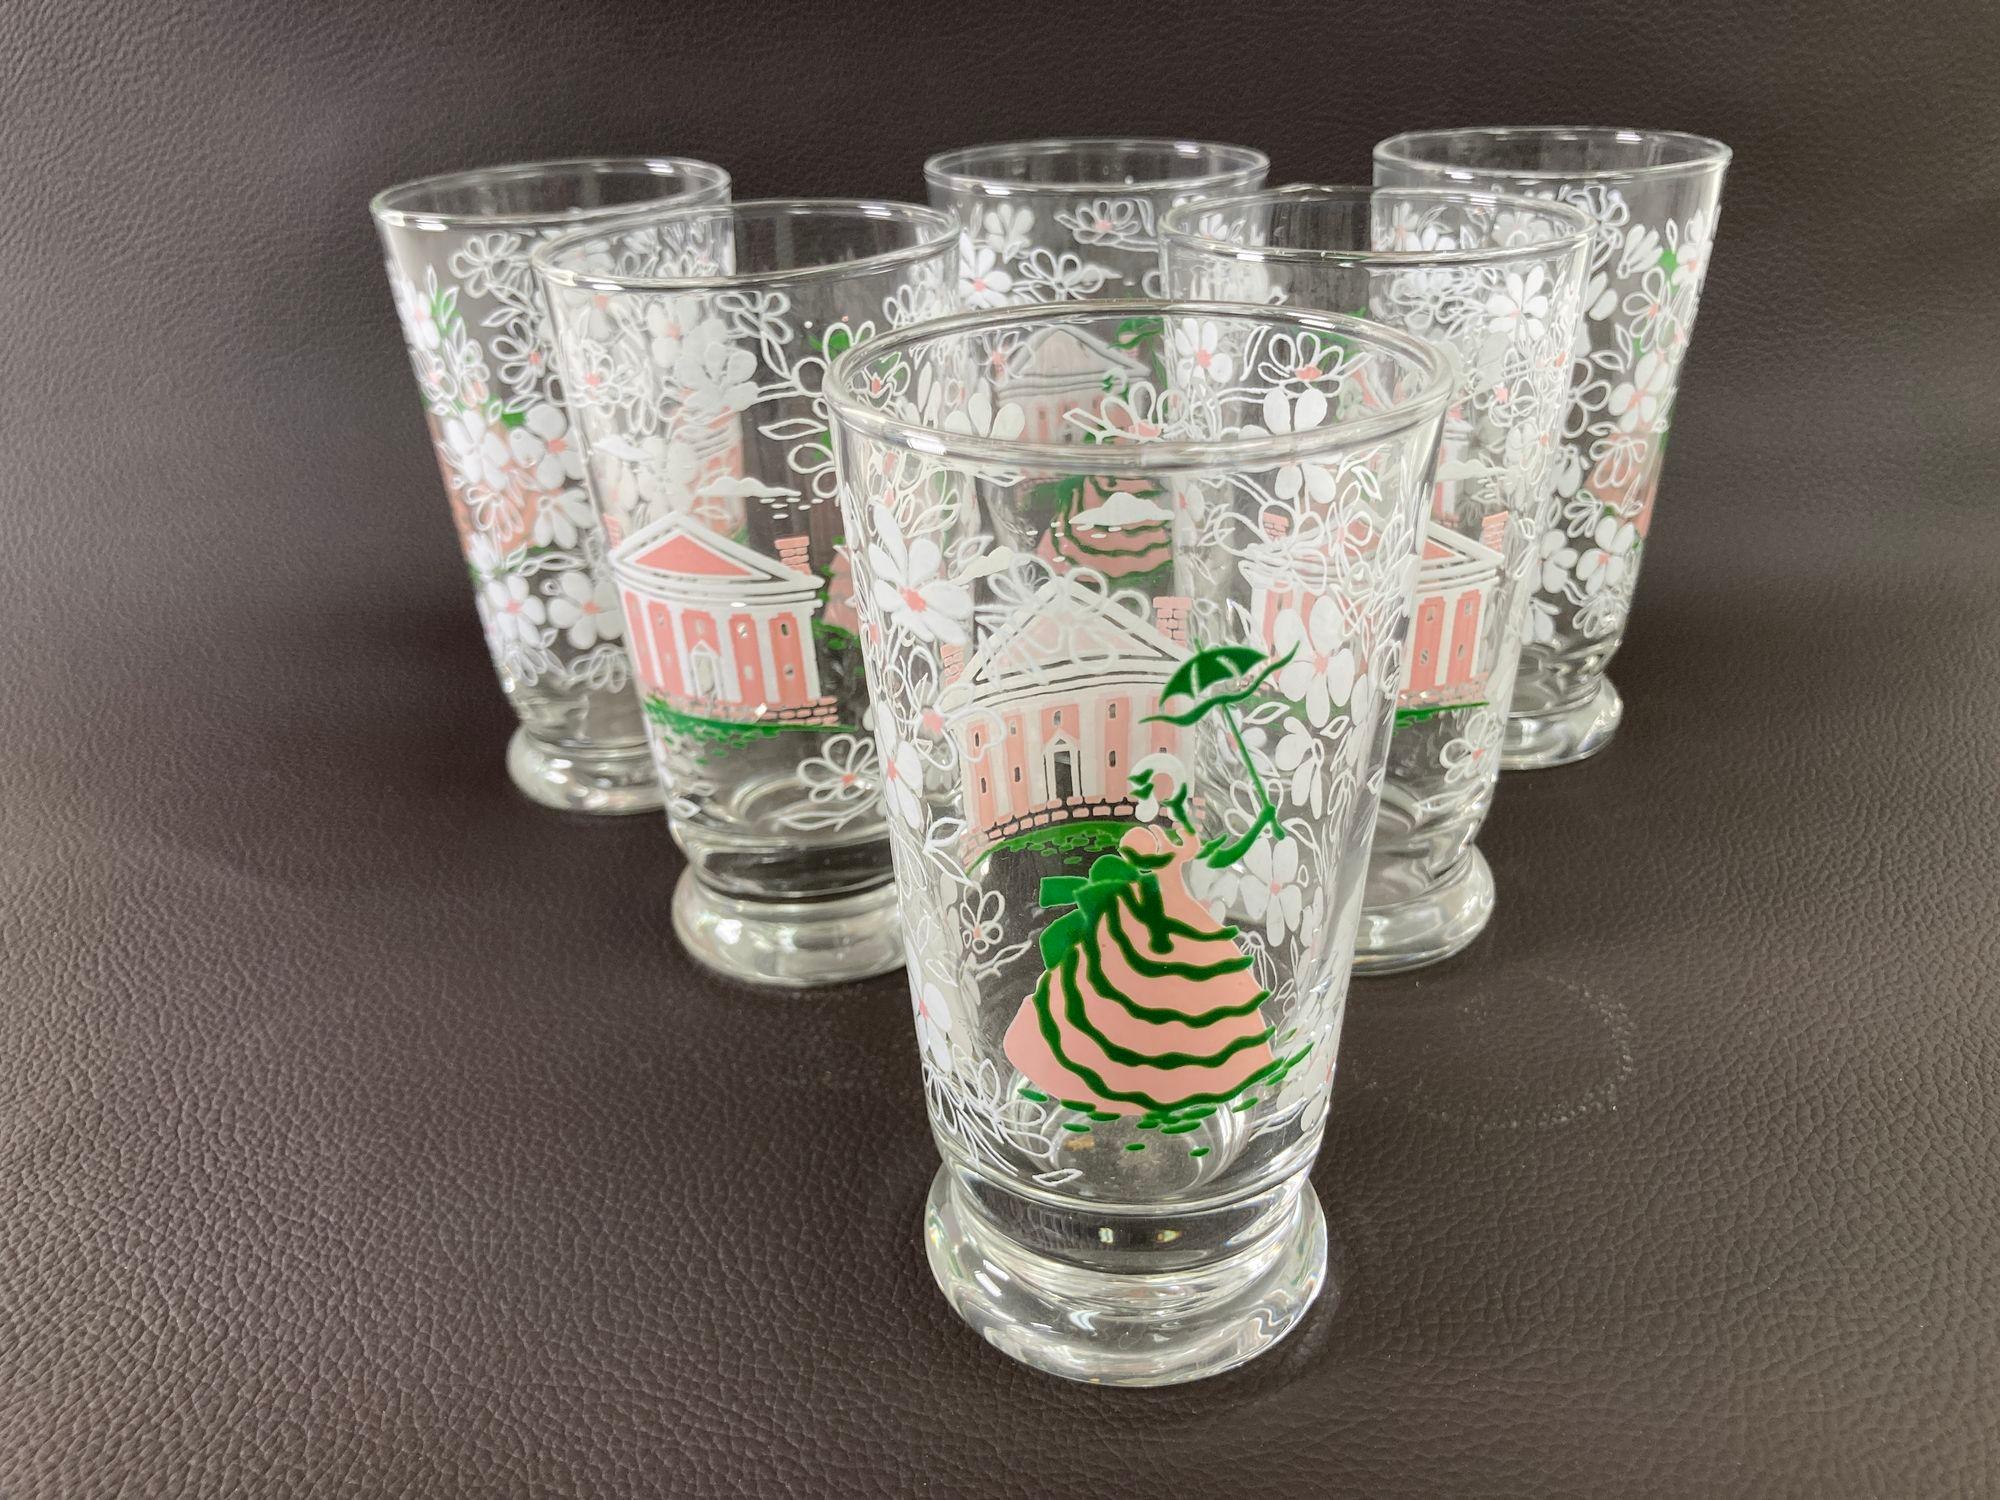 https://a.1stdibscdn.com/vintage-kentucky-derby-libbey-americana-southern-belle-magnolia-glasses-barware-for-sale-picture-2/f_9068/f_367880321698262064355/1_IMG_7137_master.jpeg